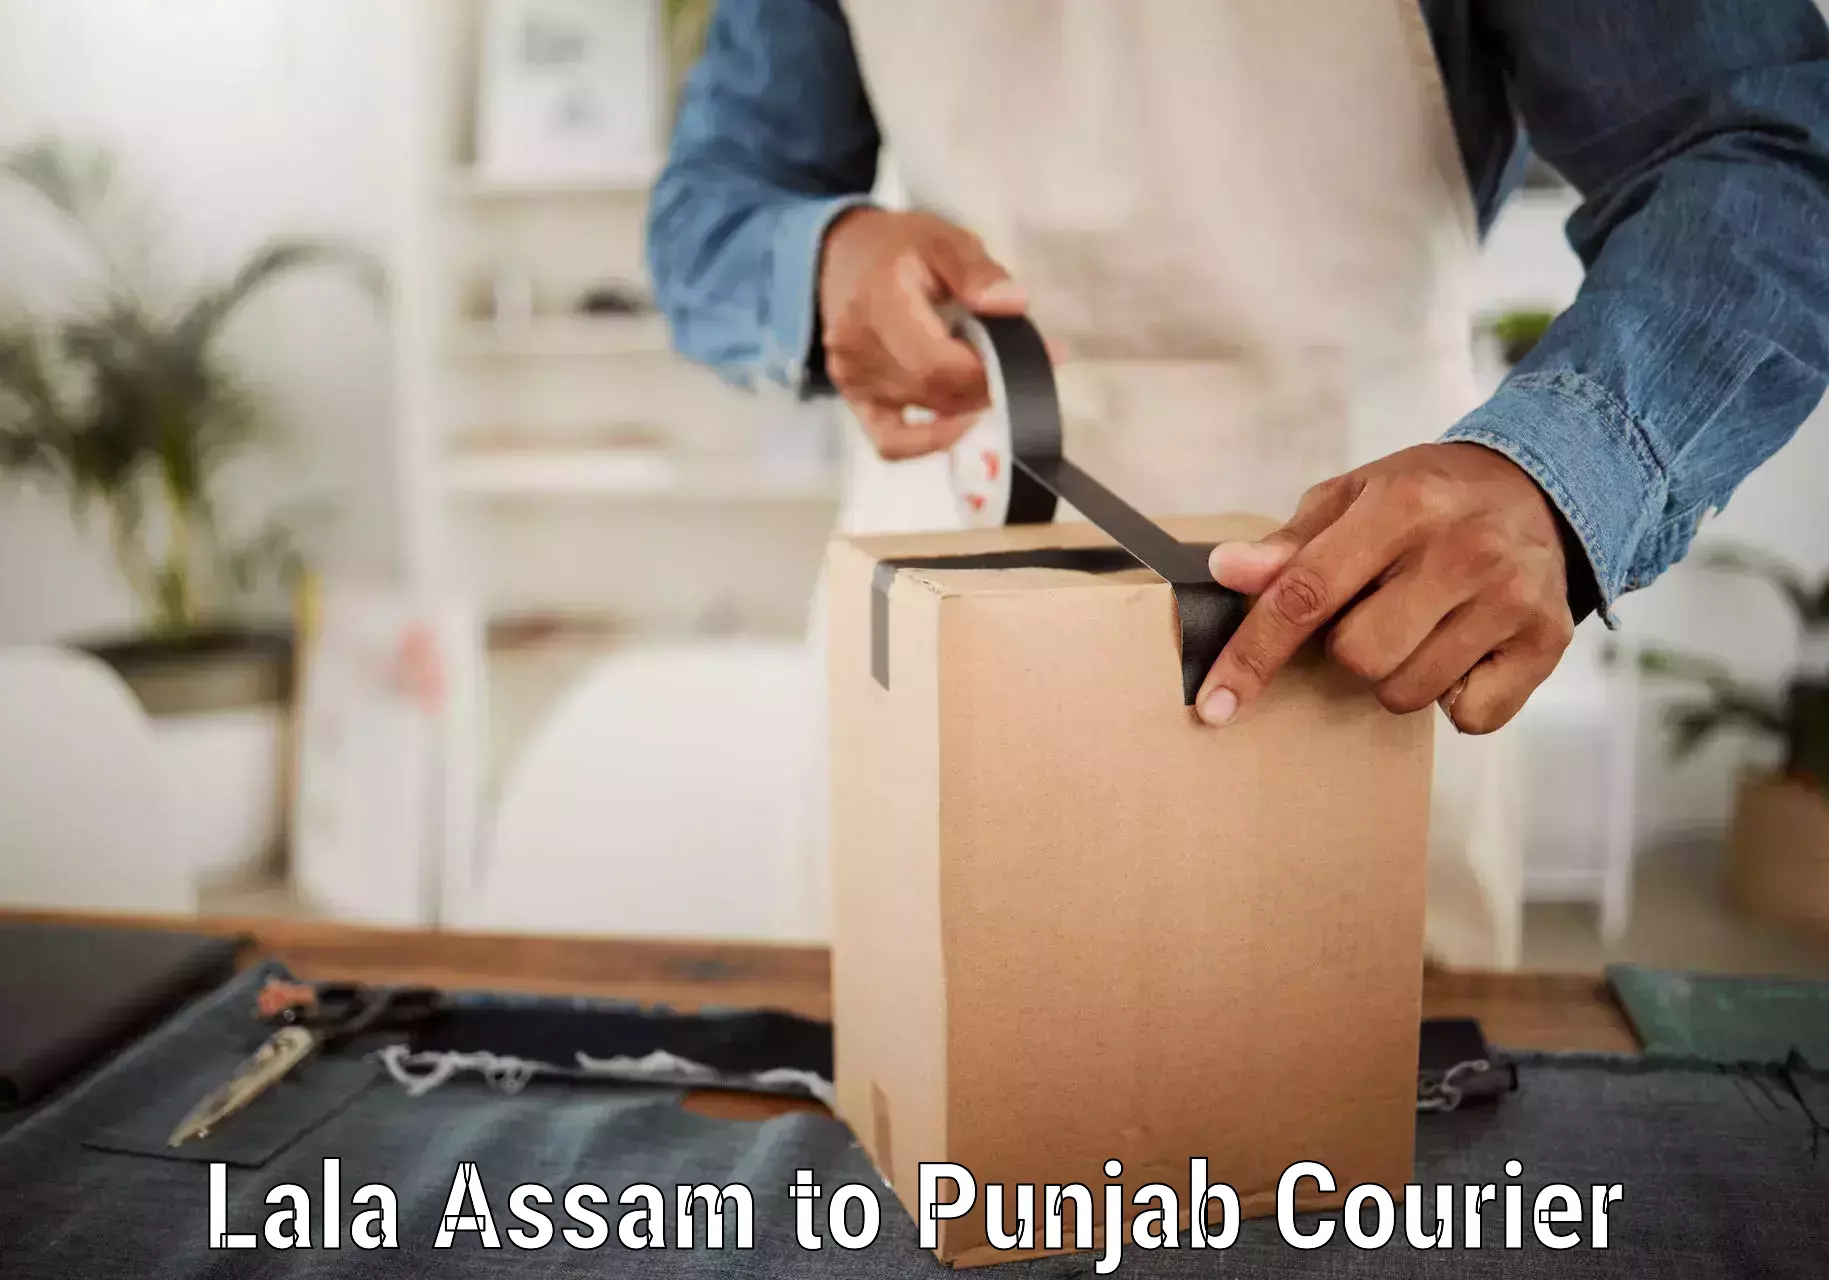 Reliable courier services Lala Assam to Central University of Punjab Bathinda